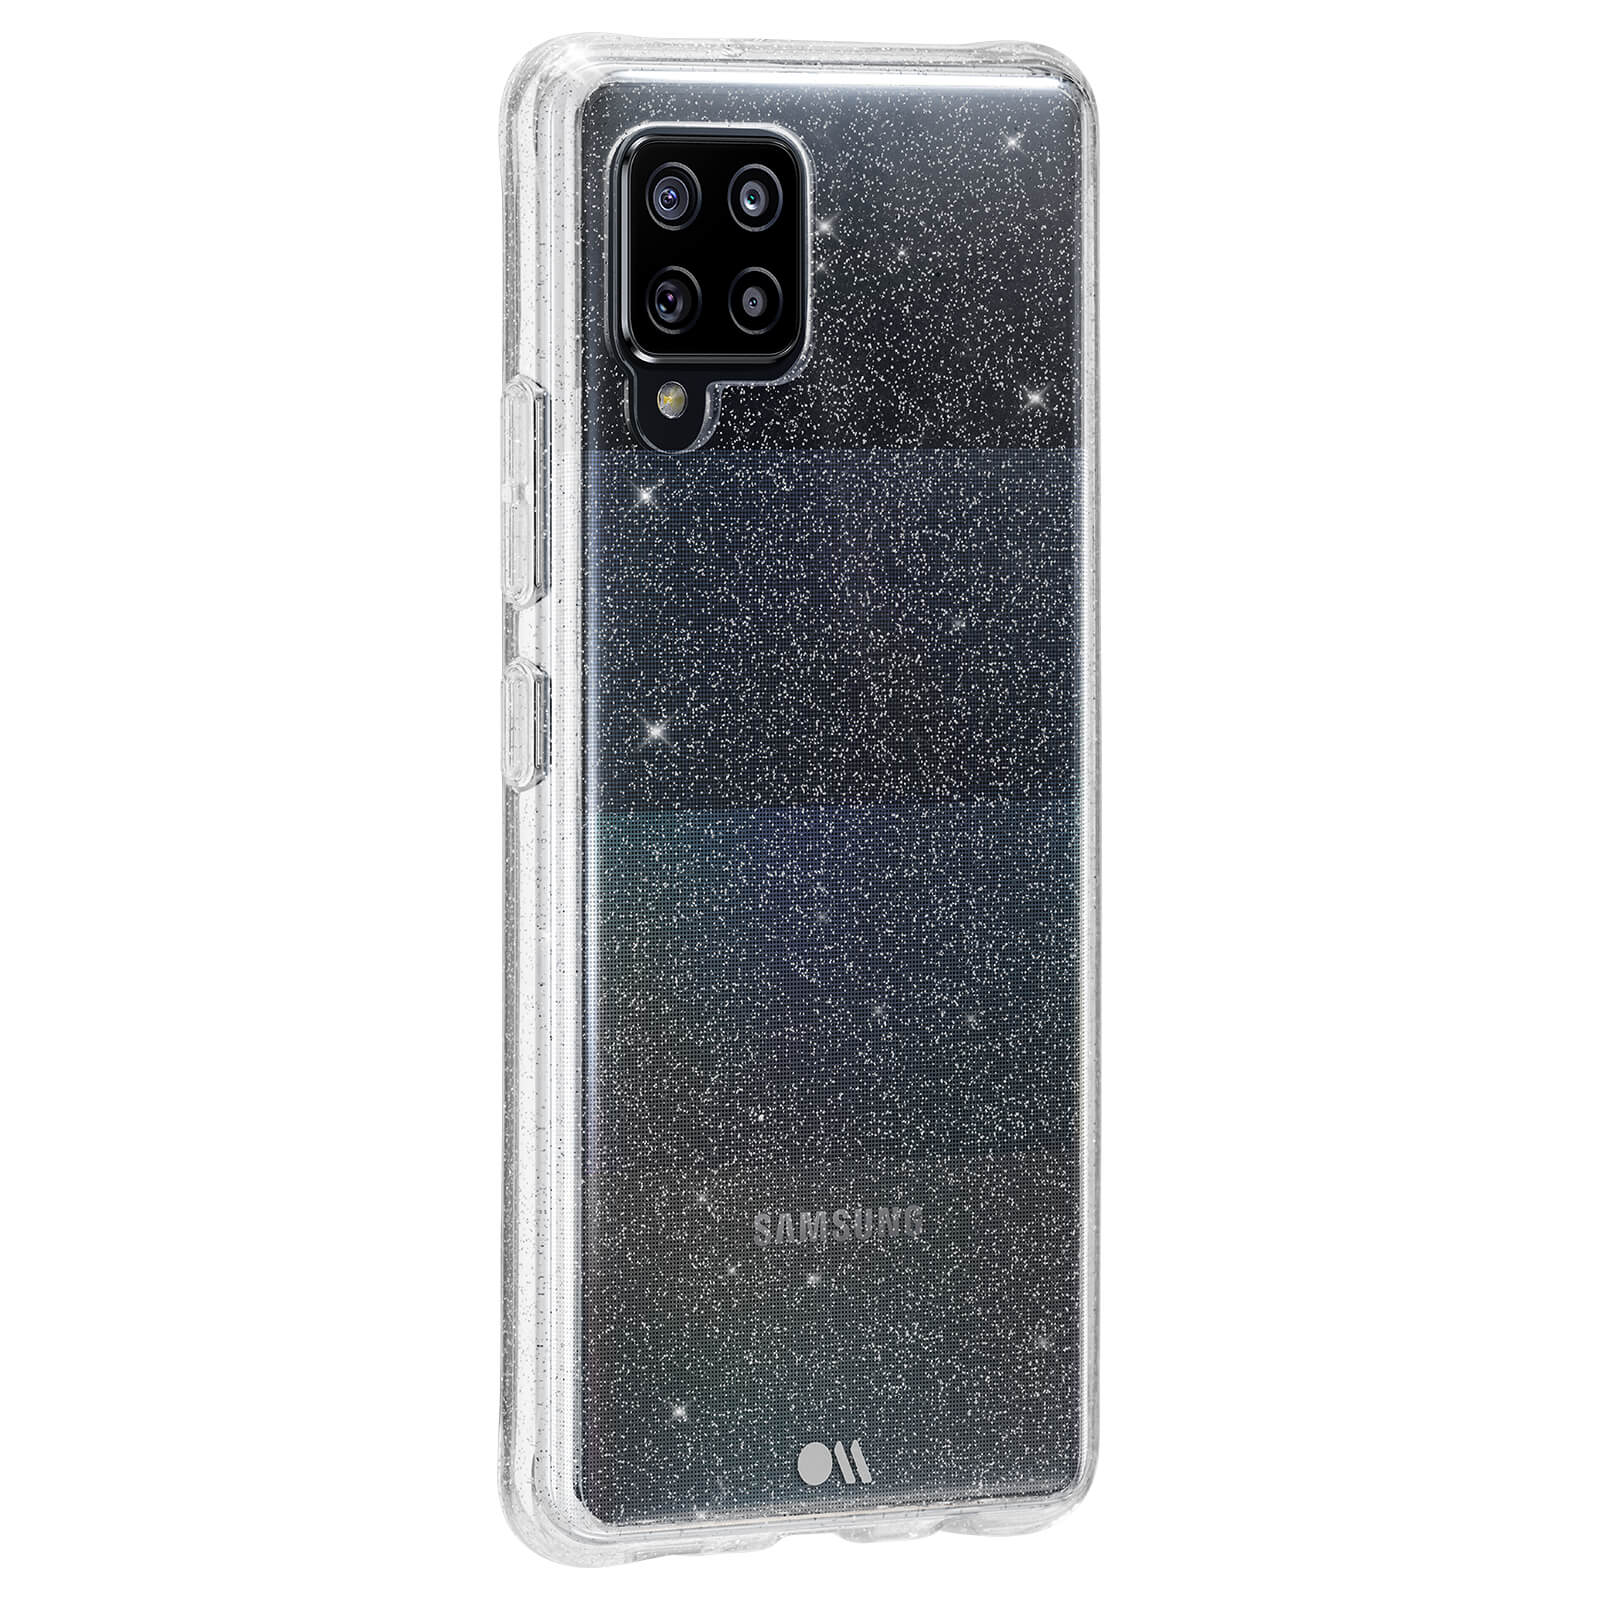 Sparkle clear case for Galaxy A42 5G. color::Clear